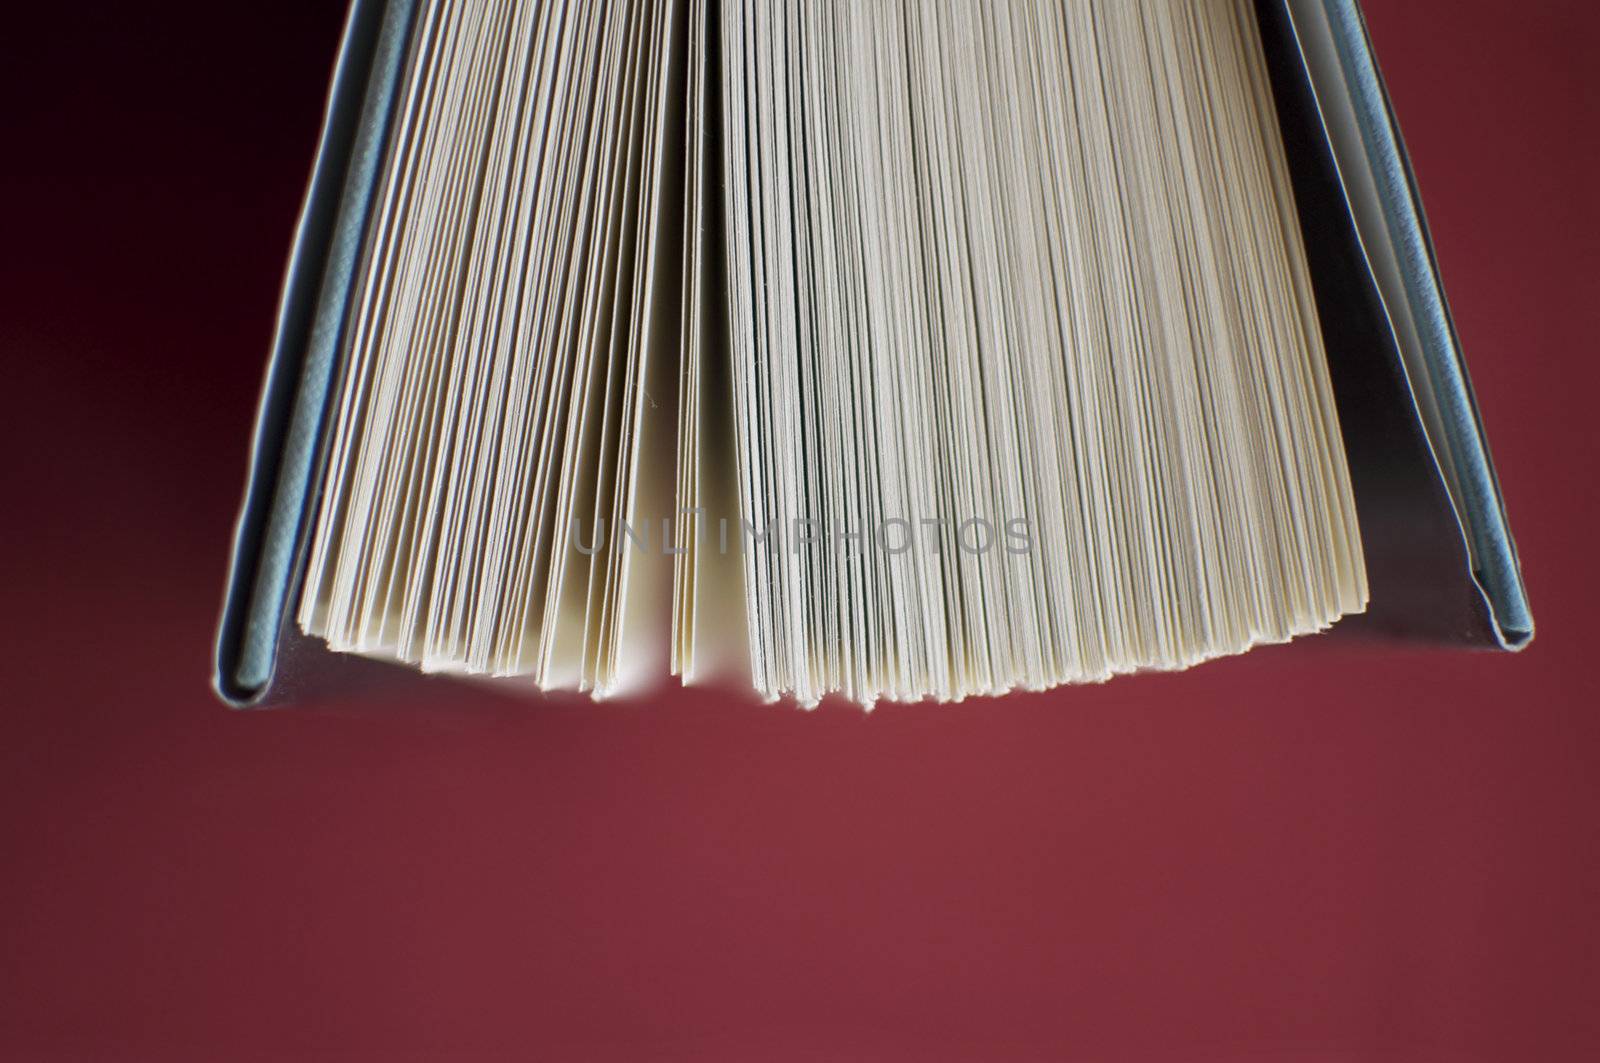 Book Pages Background by gilmourbto2001